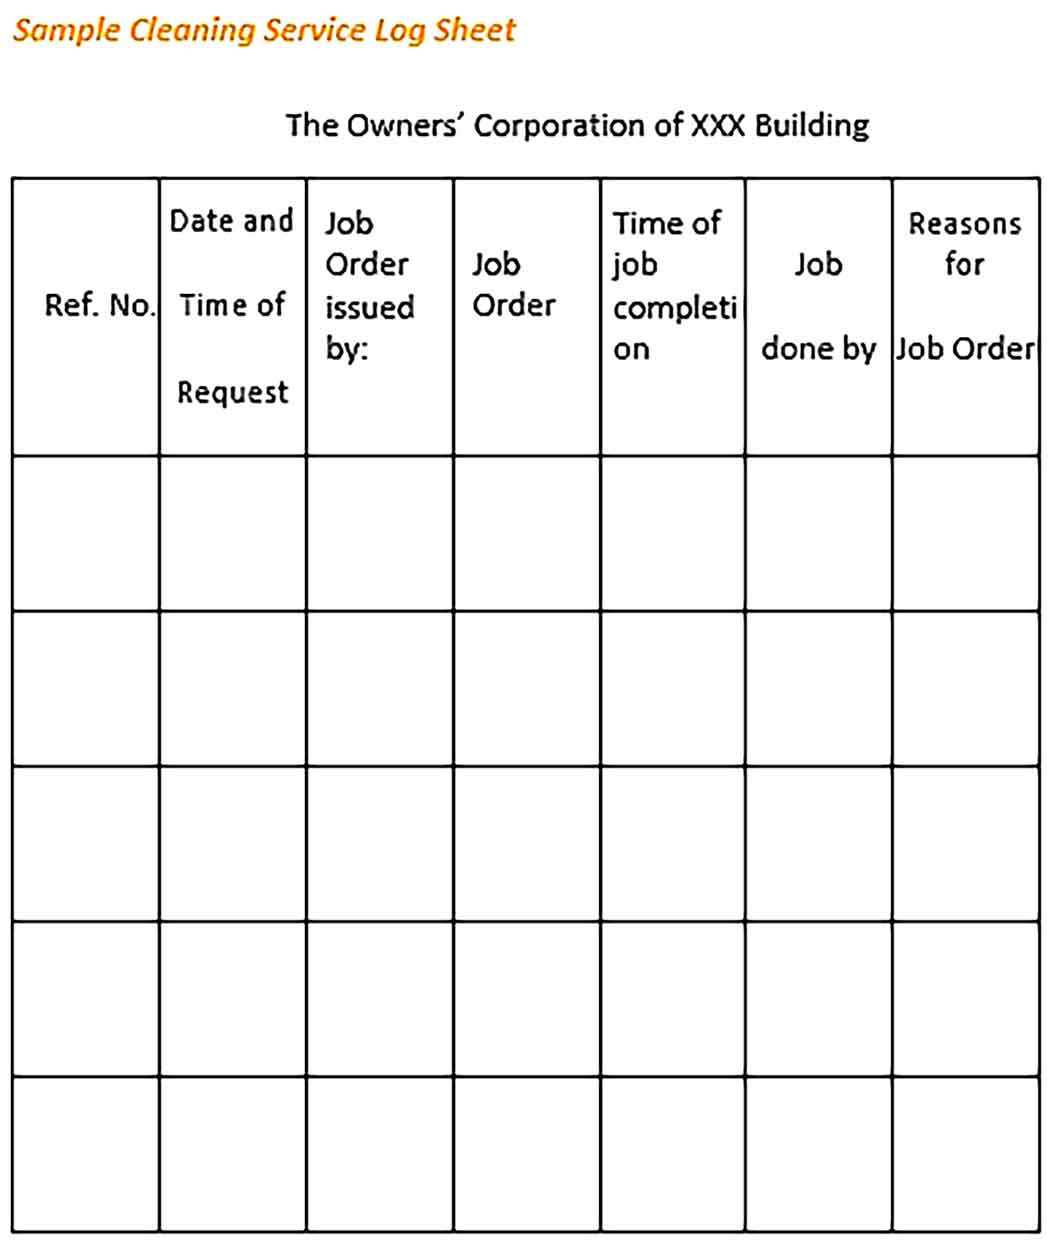 Template Cleaning Service Log Sheet Sample